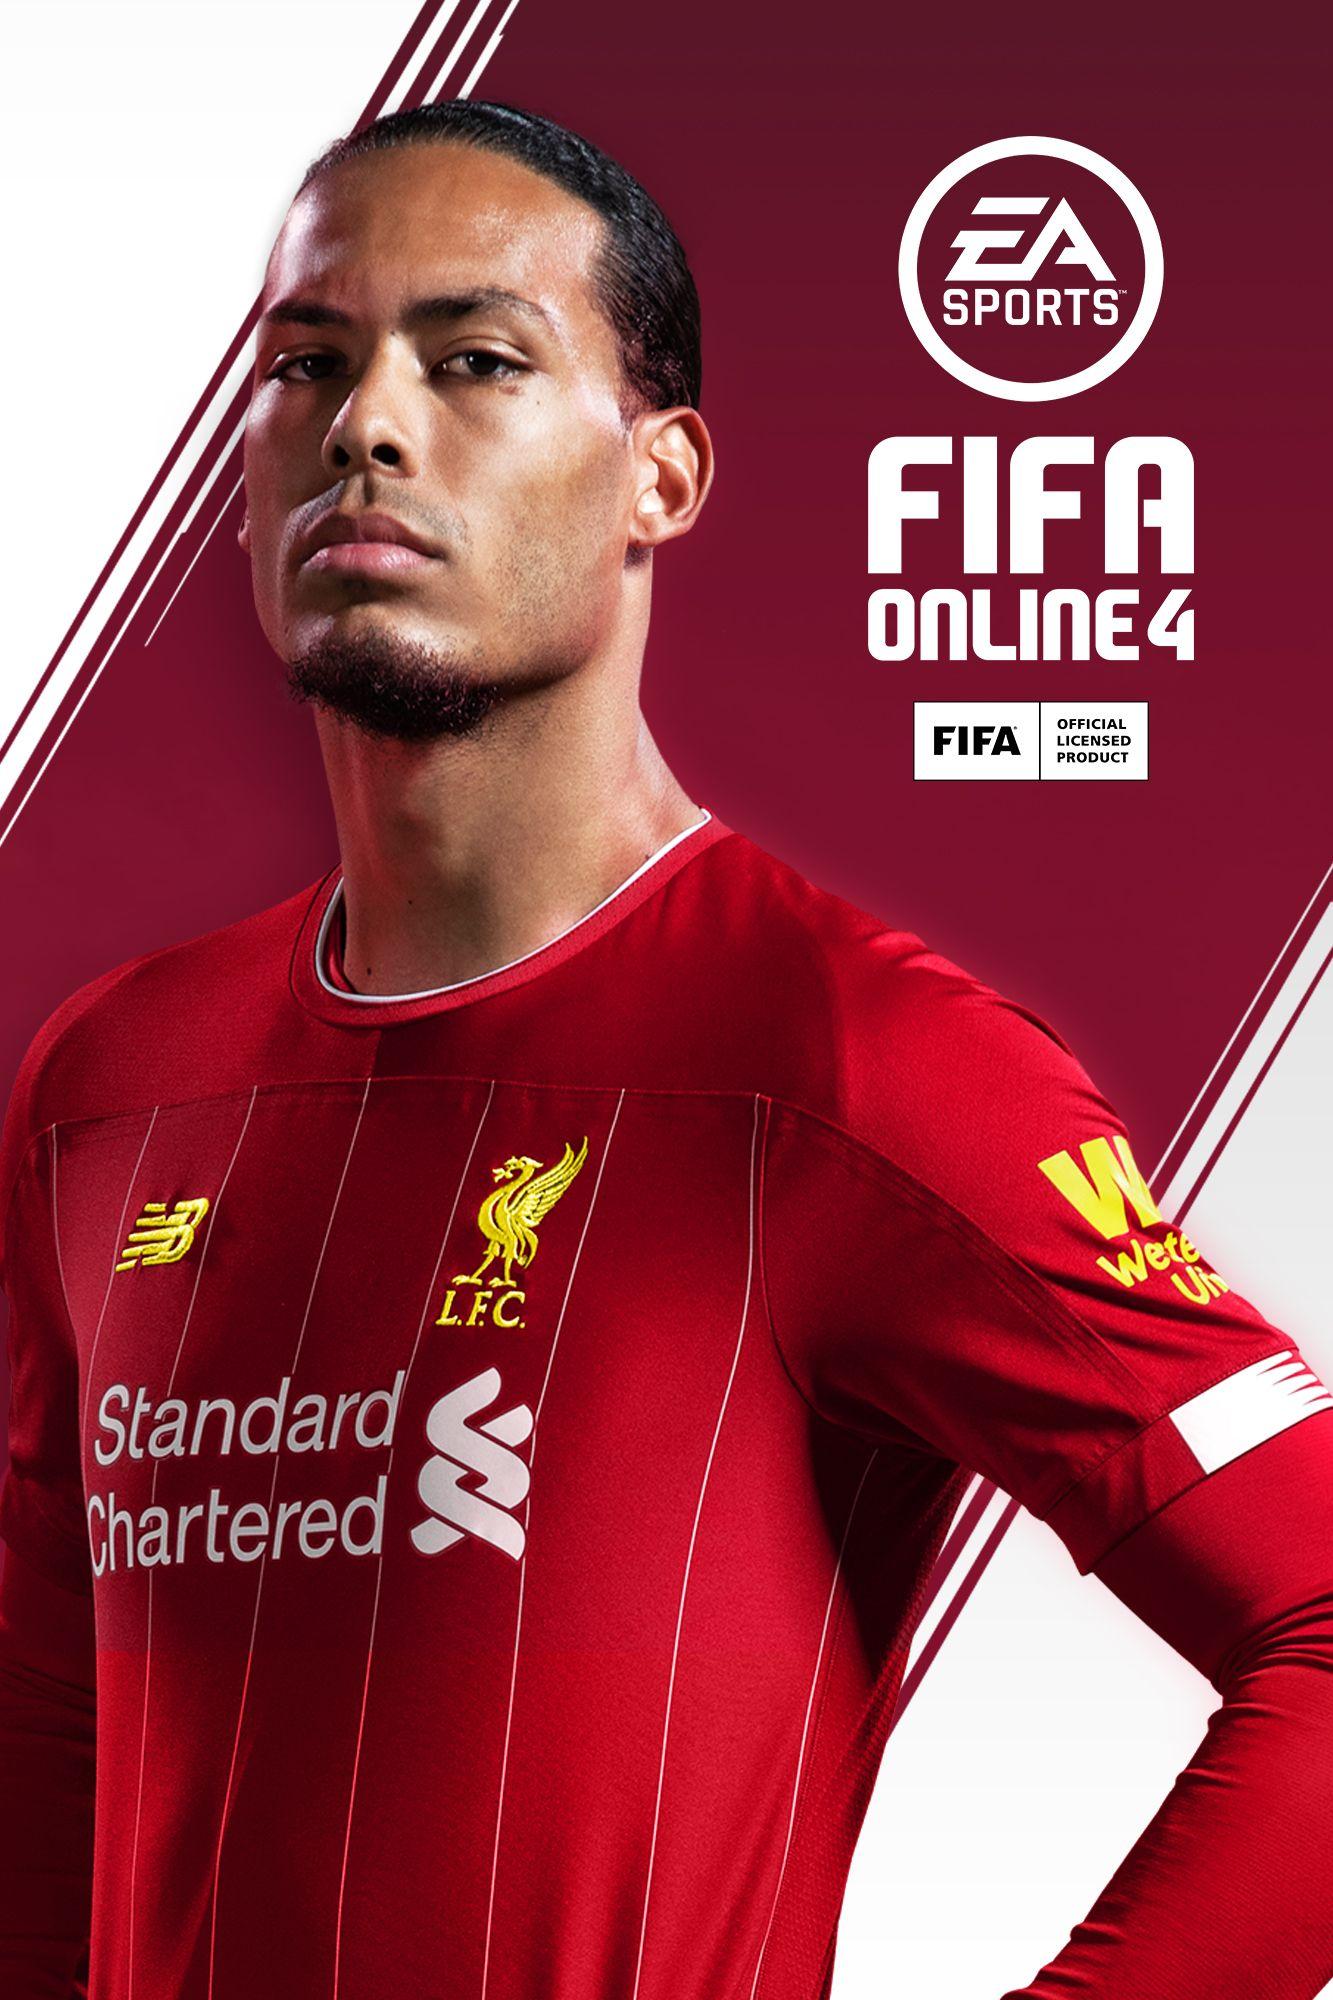 fifa online 4 download in usa